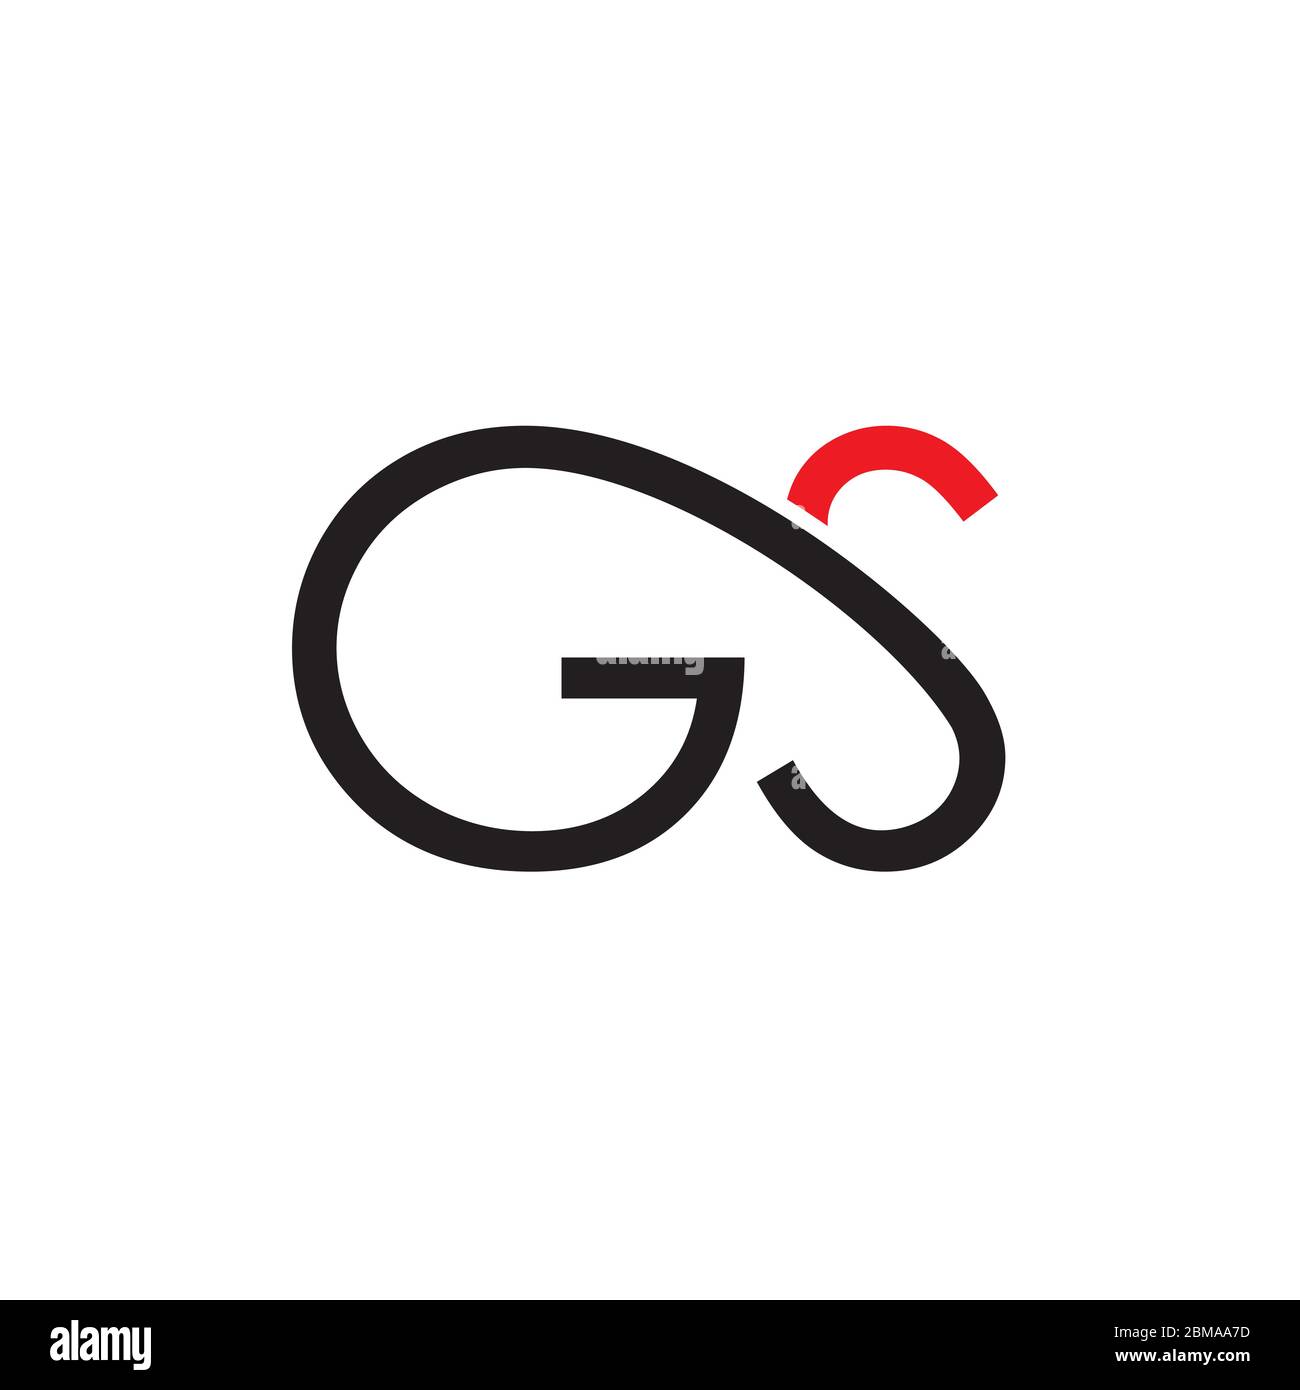 Initial letter gs logo template design. | CanStock